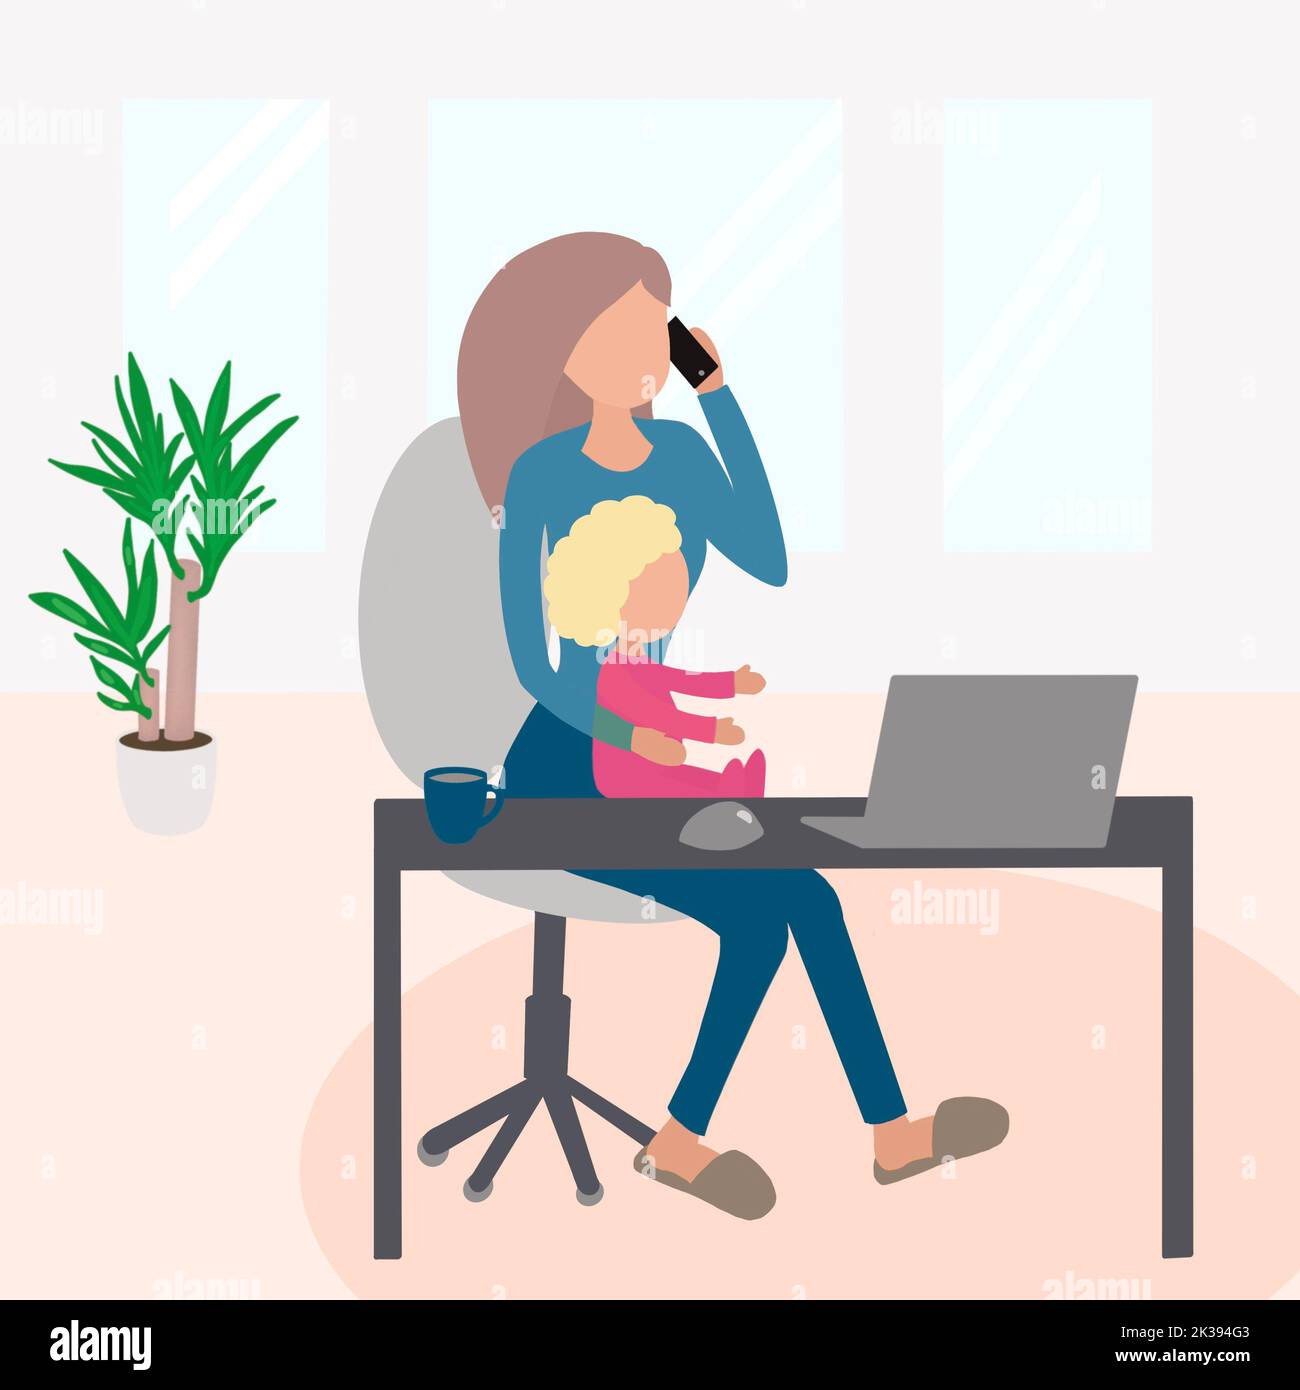 Working parents with their kids, parenting, work life balance Stock Photo